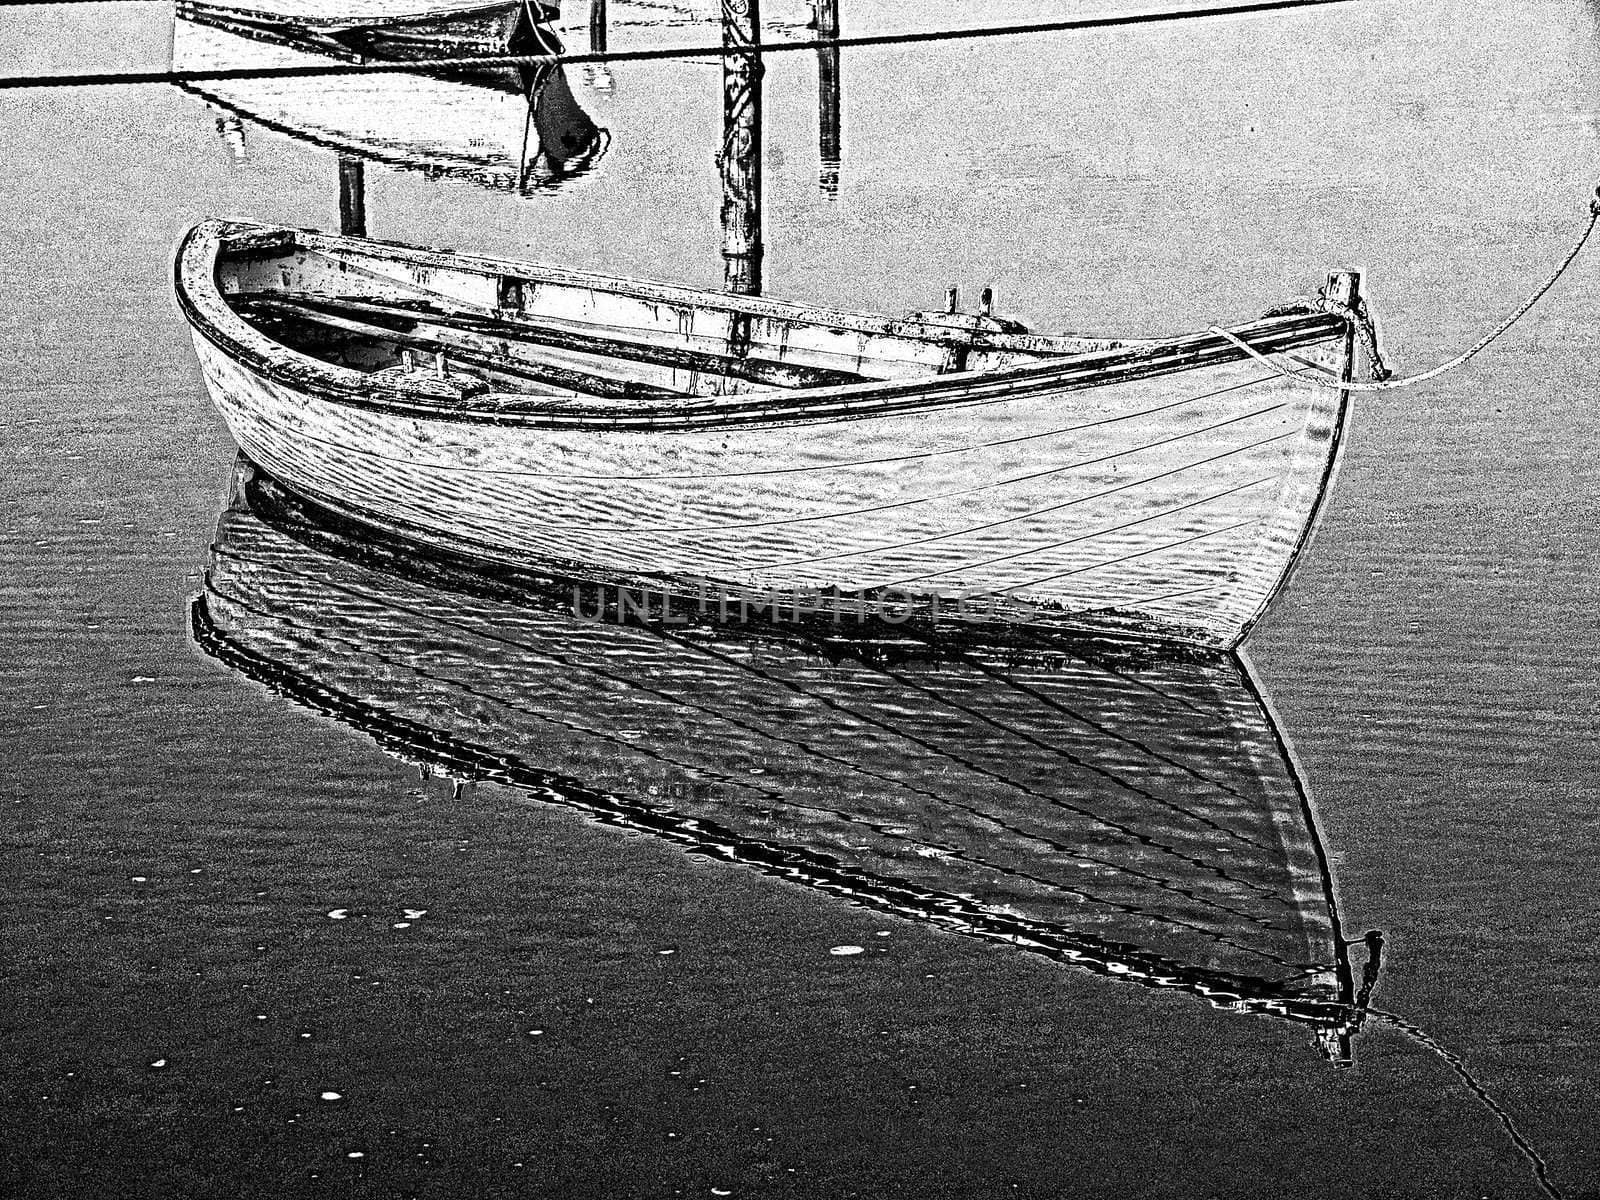 Small classical dinghy dory fishing raw boat floating in the water with reflection digital art manipulation